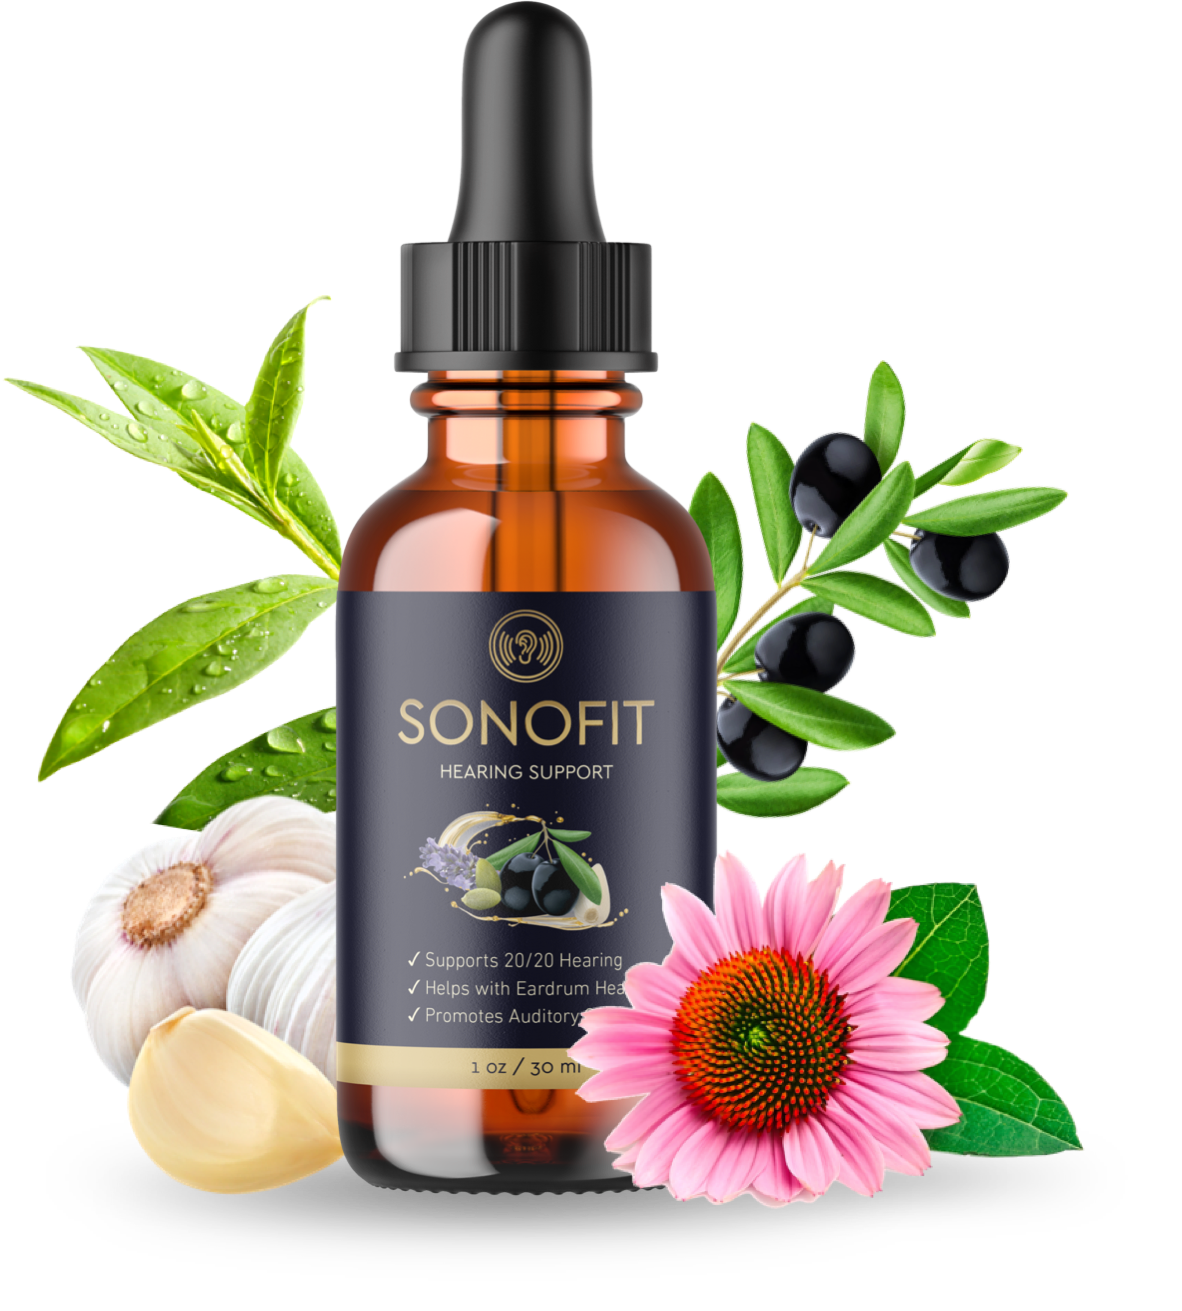 Sonofit - the Ultimate Hearing Aid Solution for Optimal Ear Health!